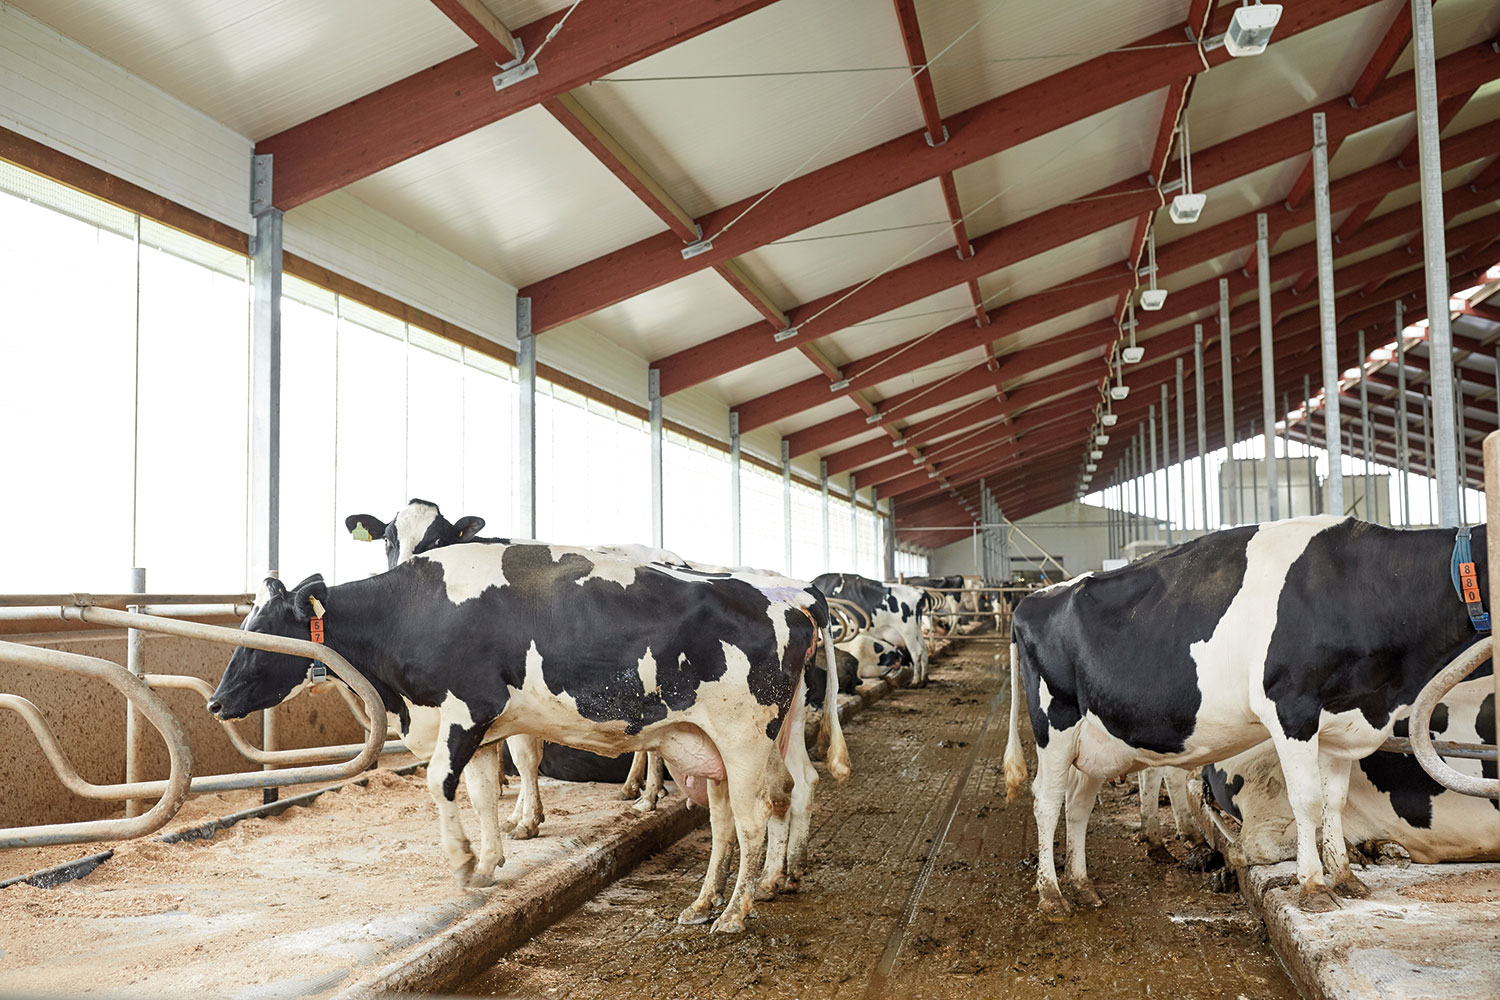 herd-of-cows-in-cowshed-stable-on-dairy-farm-PTYCLLT.jpg